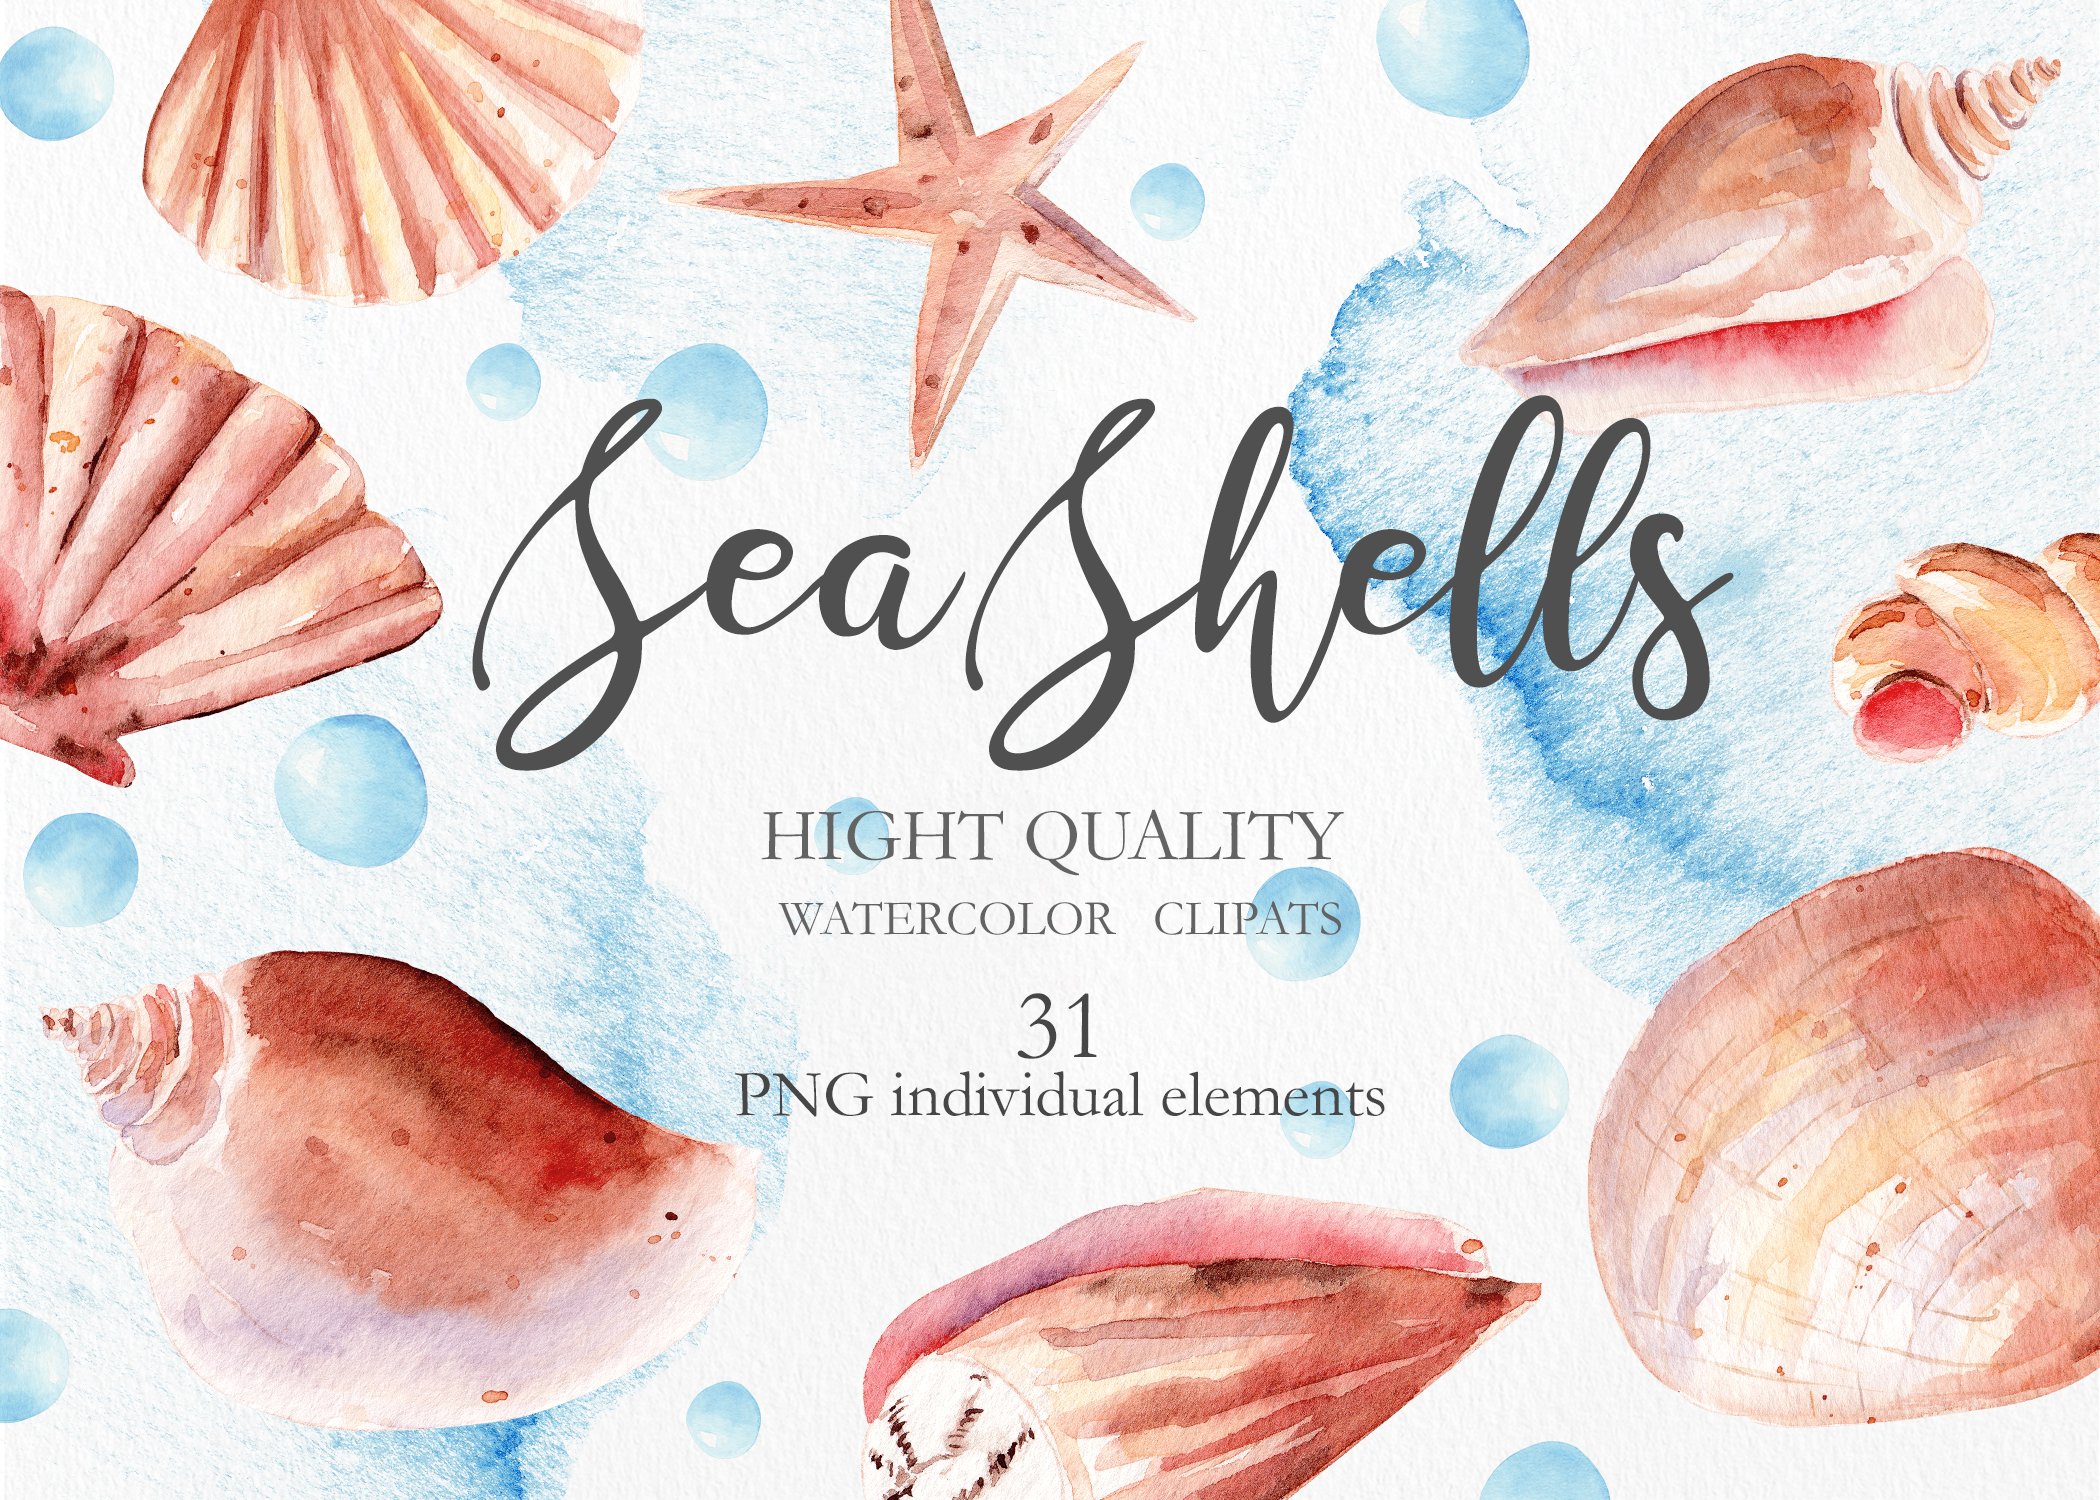 Seashells Clipart Collection cover image.